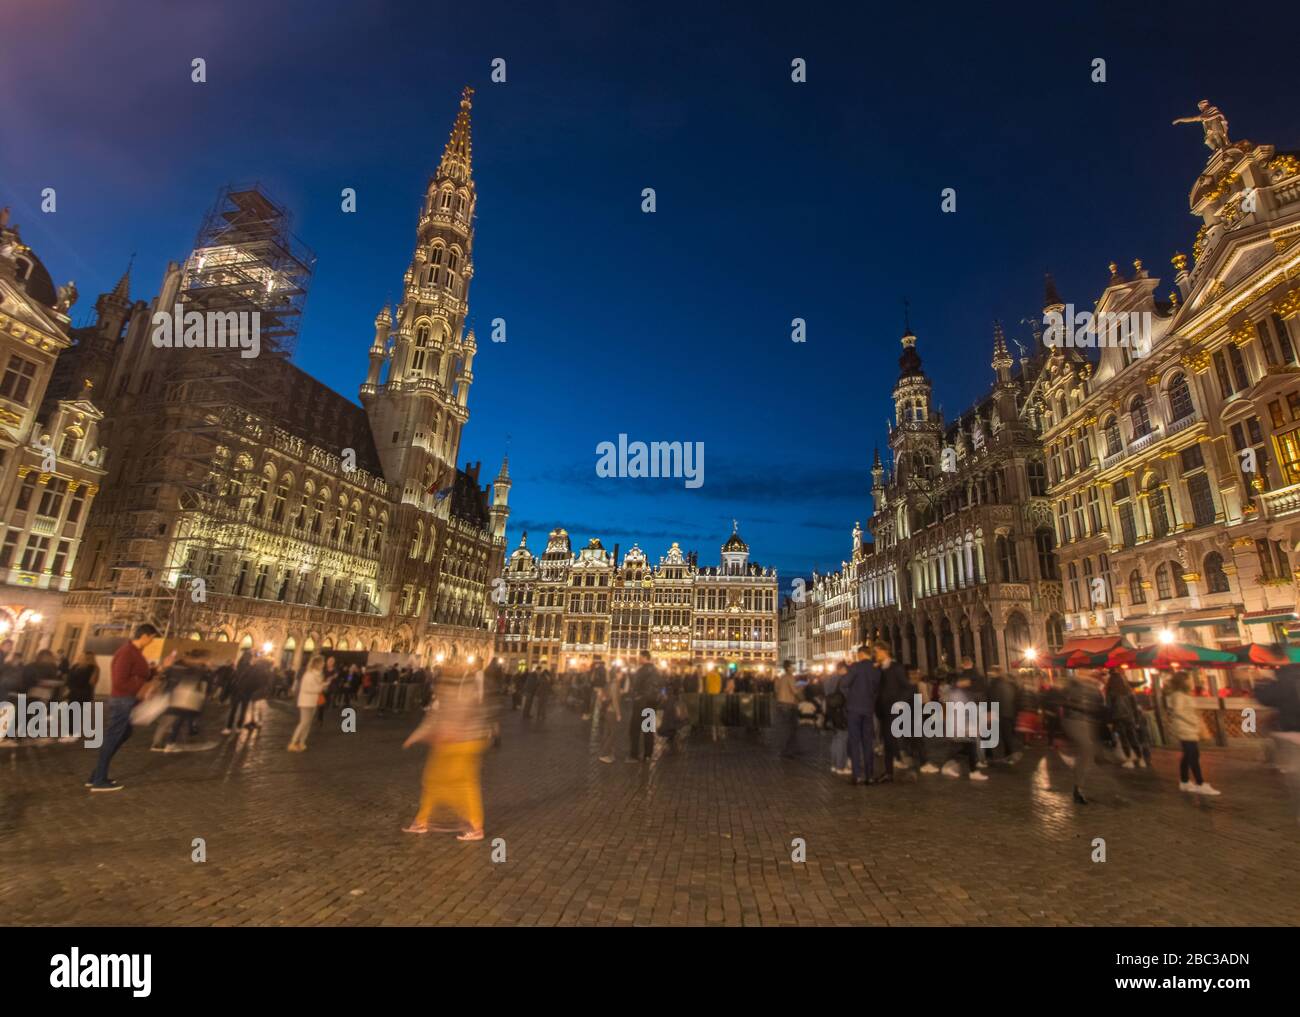 A Night View Of The Grand Place Central Square In Brussels, Belgium Stock Photo